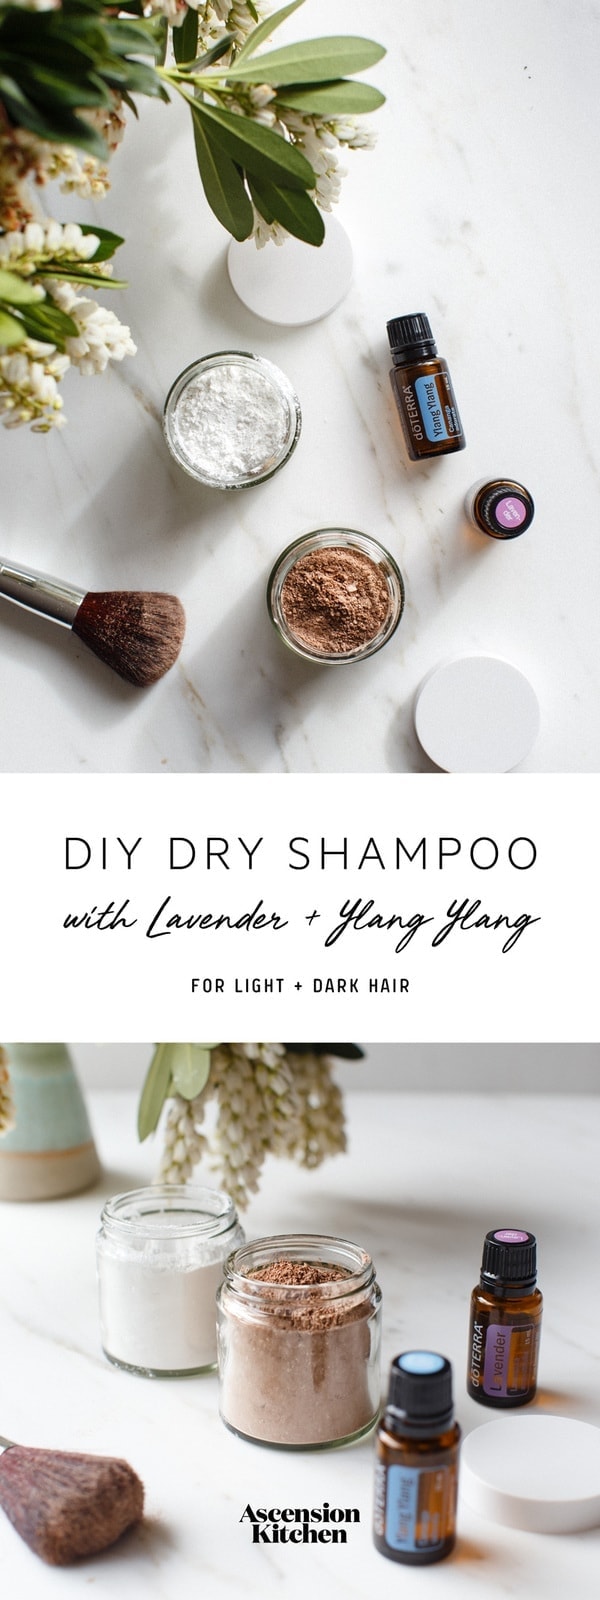 A cheap and simple DIY dry shampoo for light and dark hair – scented with lavender and ylang ylang essential oils to promote healthy locks. #diybeauty #diyhair #dryshampoo #diydryshampoo #diyessentialoils #doterra #doterrarecipes #beautyrecipes #AscensionKitchen